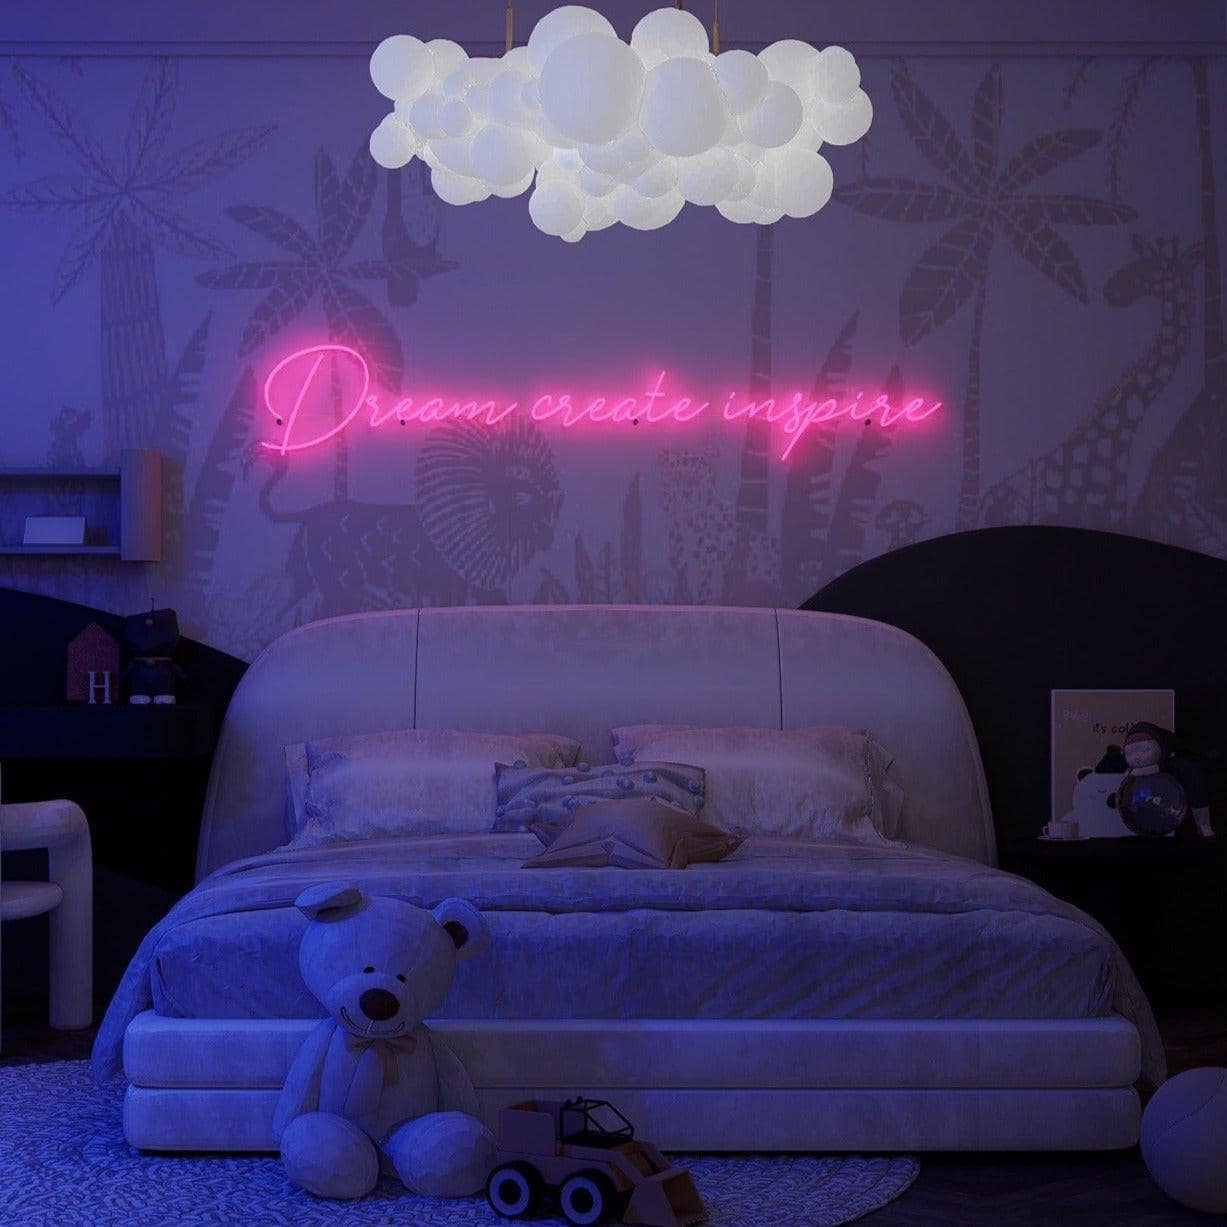 pink-neon-lights-are-lit-up-at-night-and-displayed-in-the-bedroom-dream-creat-inspire